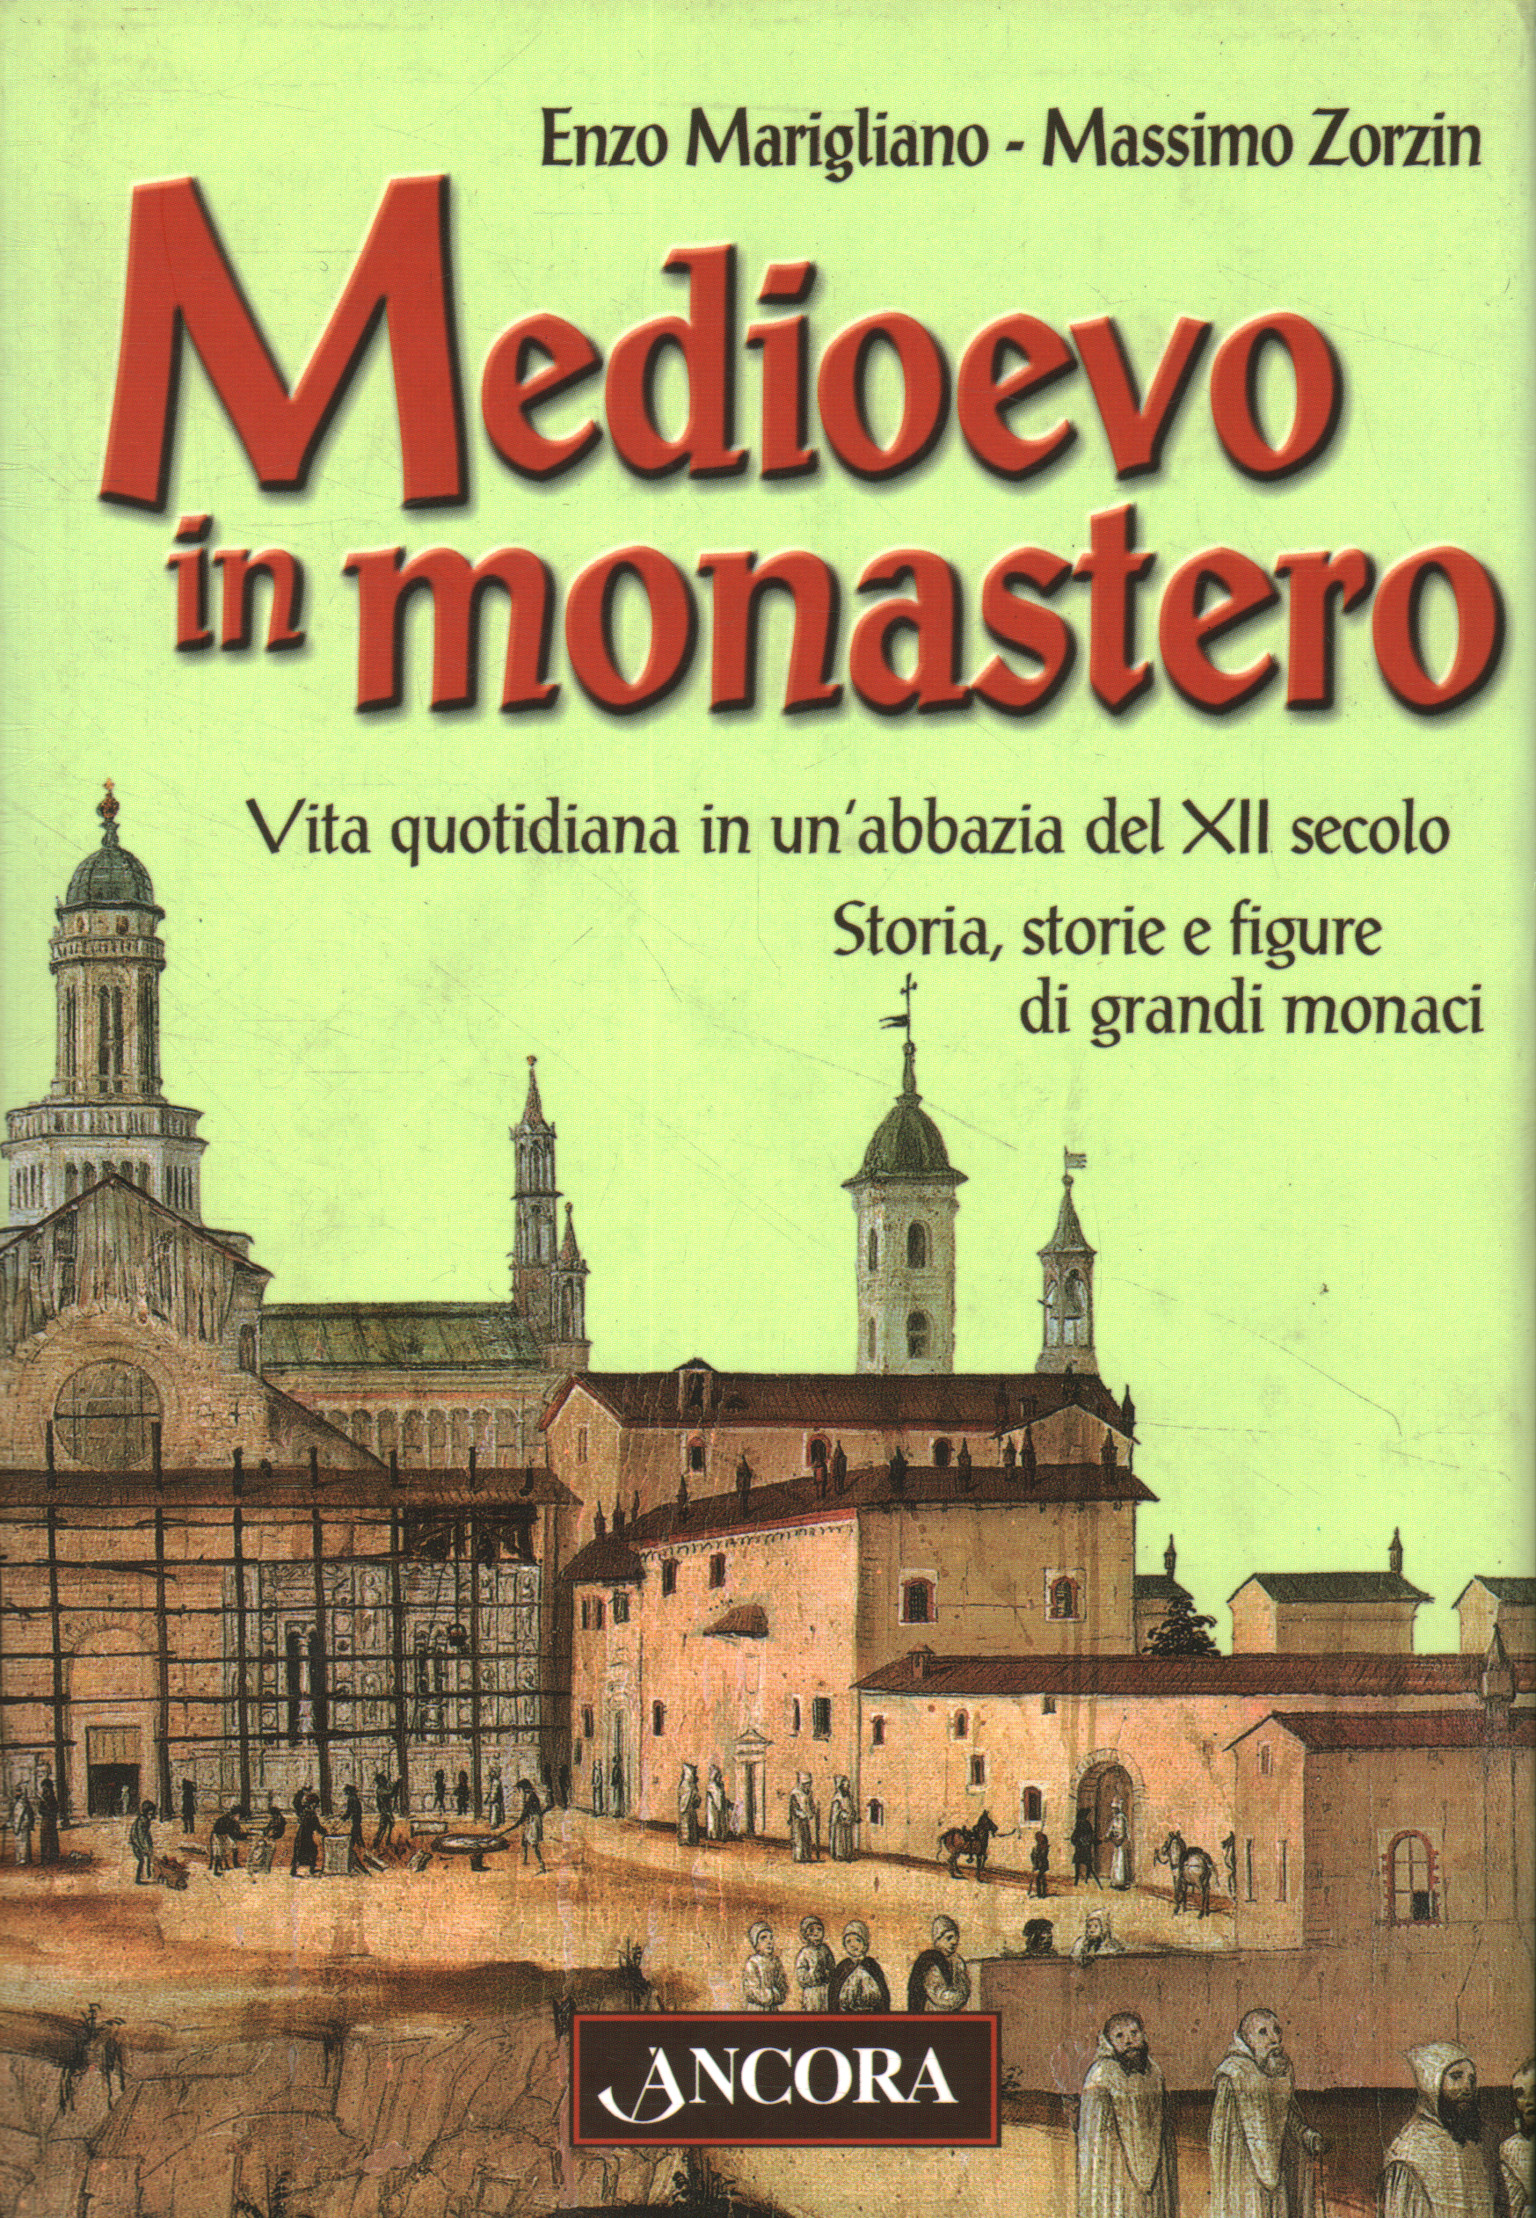 Middle Ages in the monastery